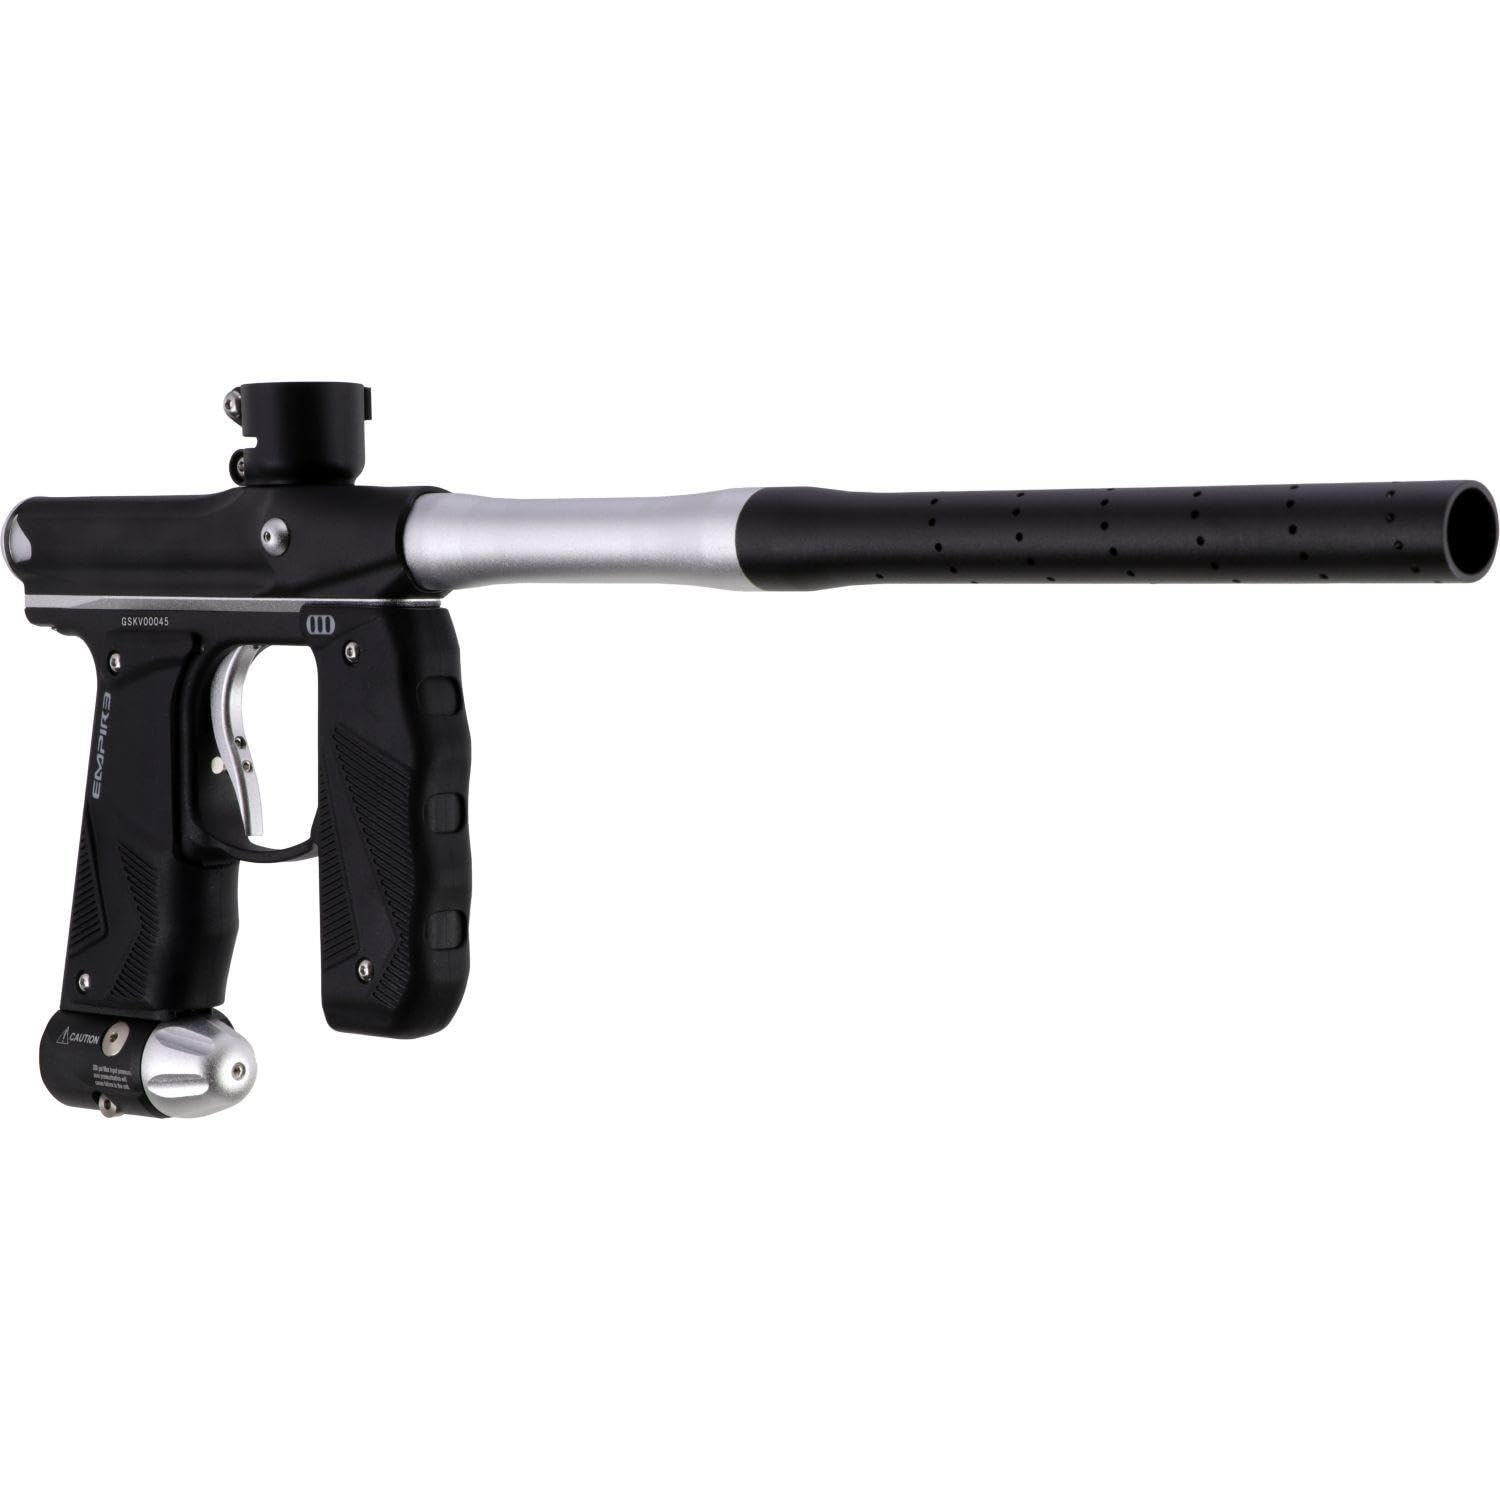 Maddog Empire Mini GS Electronic Full Auto Paintball Gun Marker w/ 48/3000 HPA Paintball Tank & Empire Halo Too Electronic Paintball Loader Starter Package